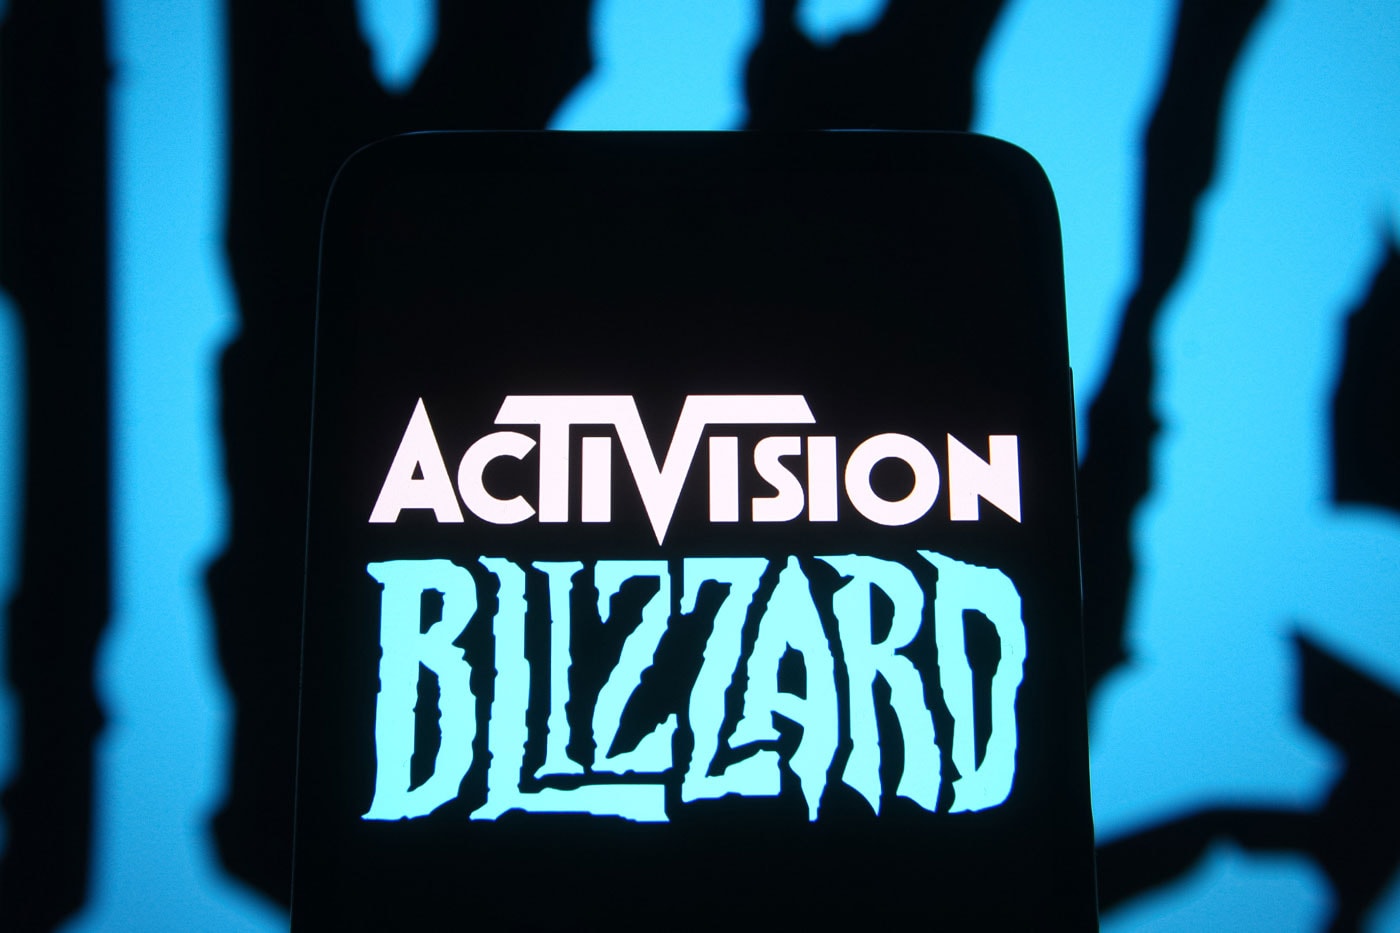 37 Activision blizzard Employees Left Workplace Misconduct Allegations fired 